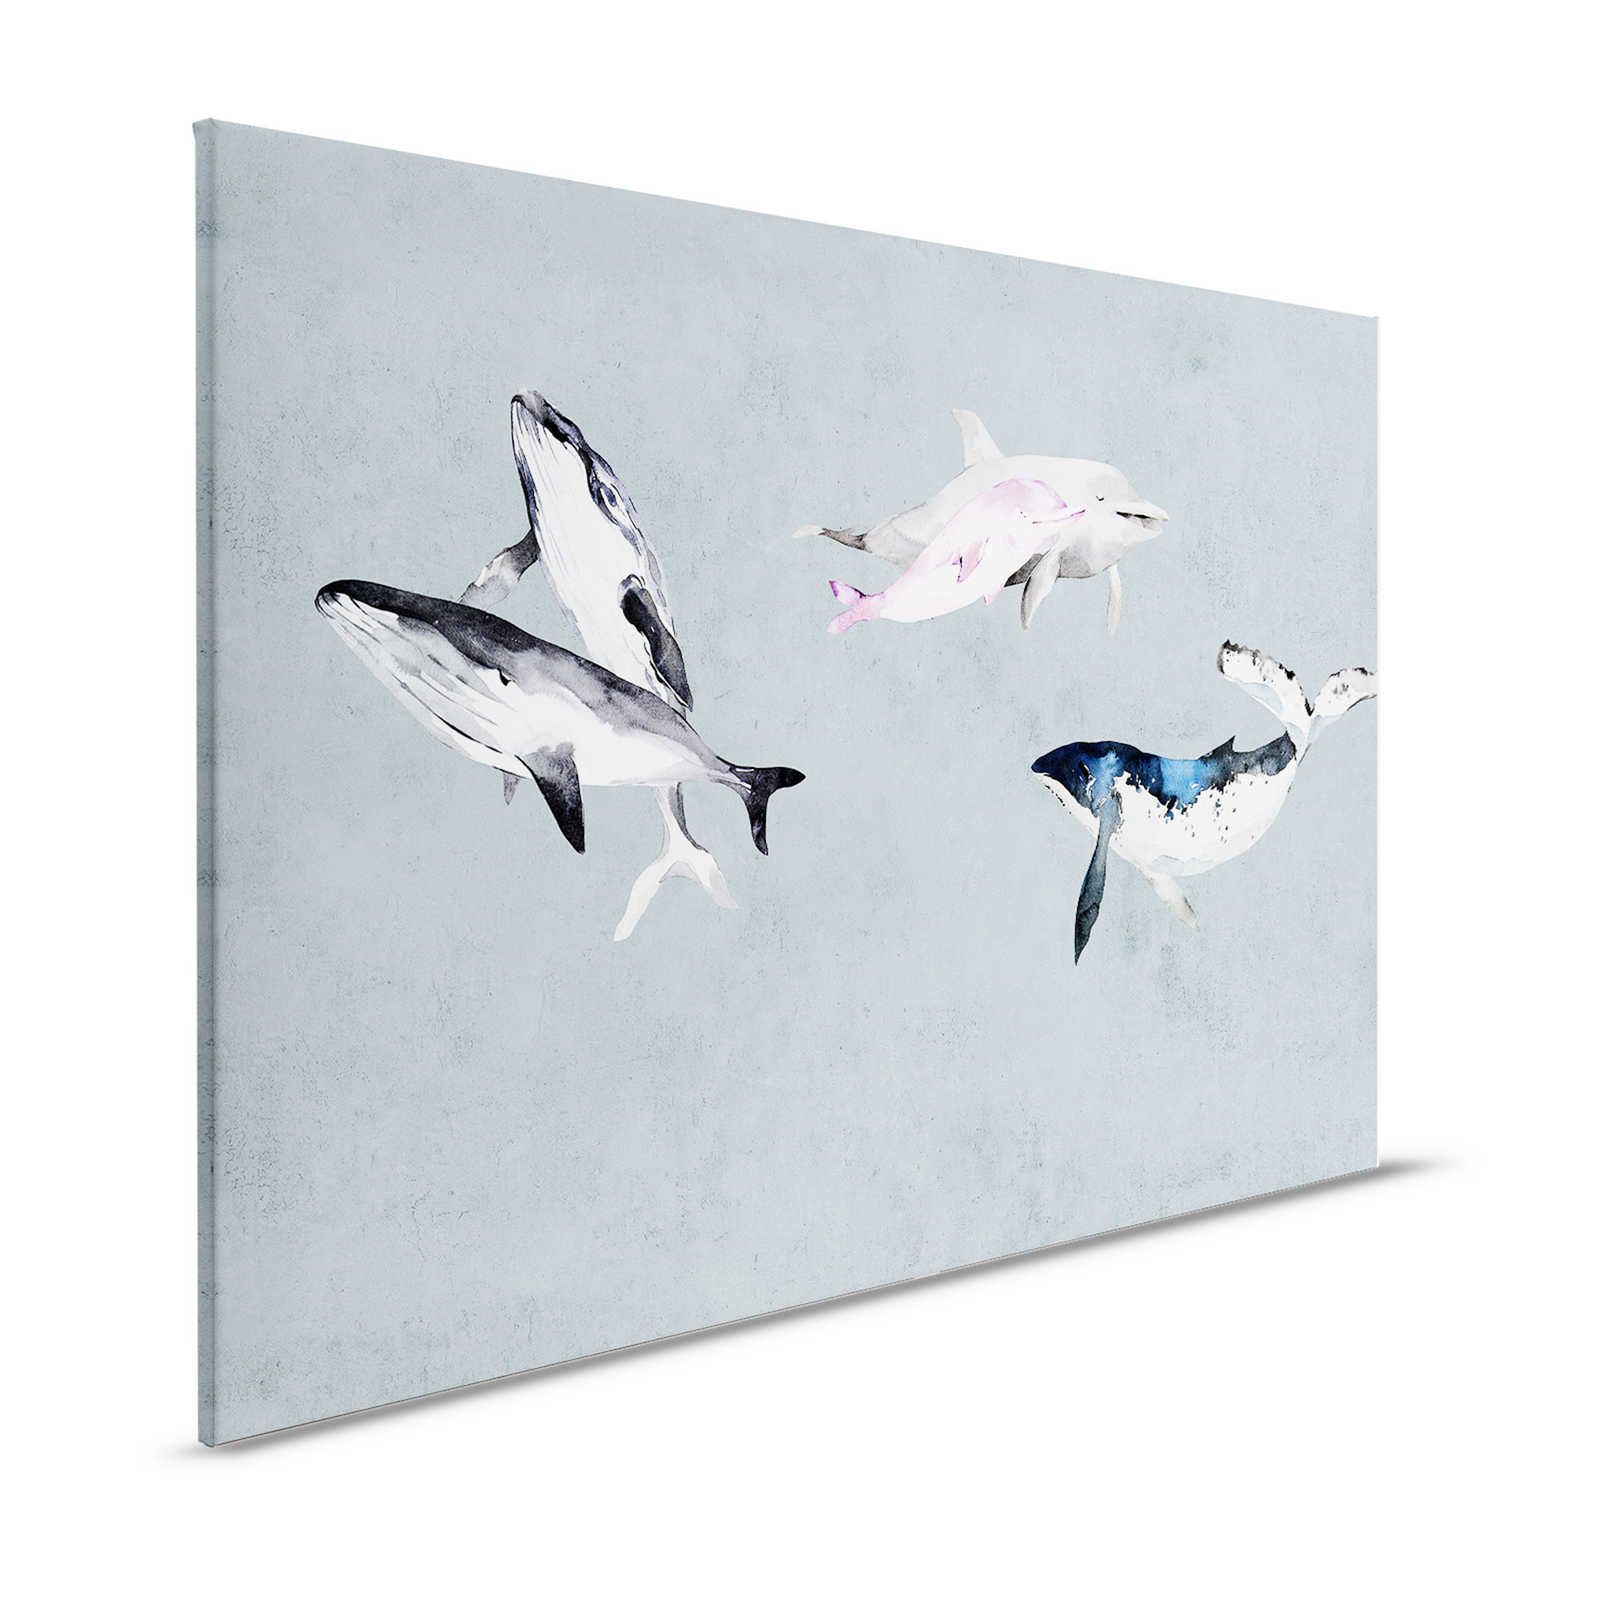 Oceans Five 1 - Canvas painting Whales & Dolphins in watercolour style - 1.20 m x 0.80 m
